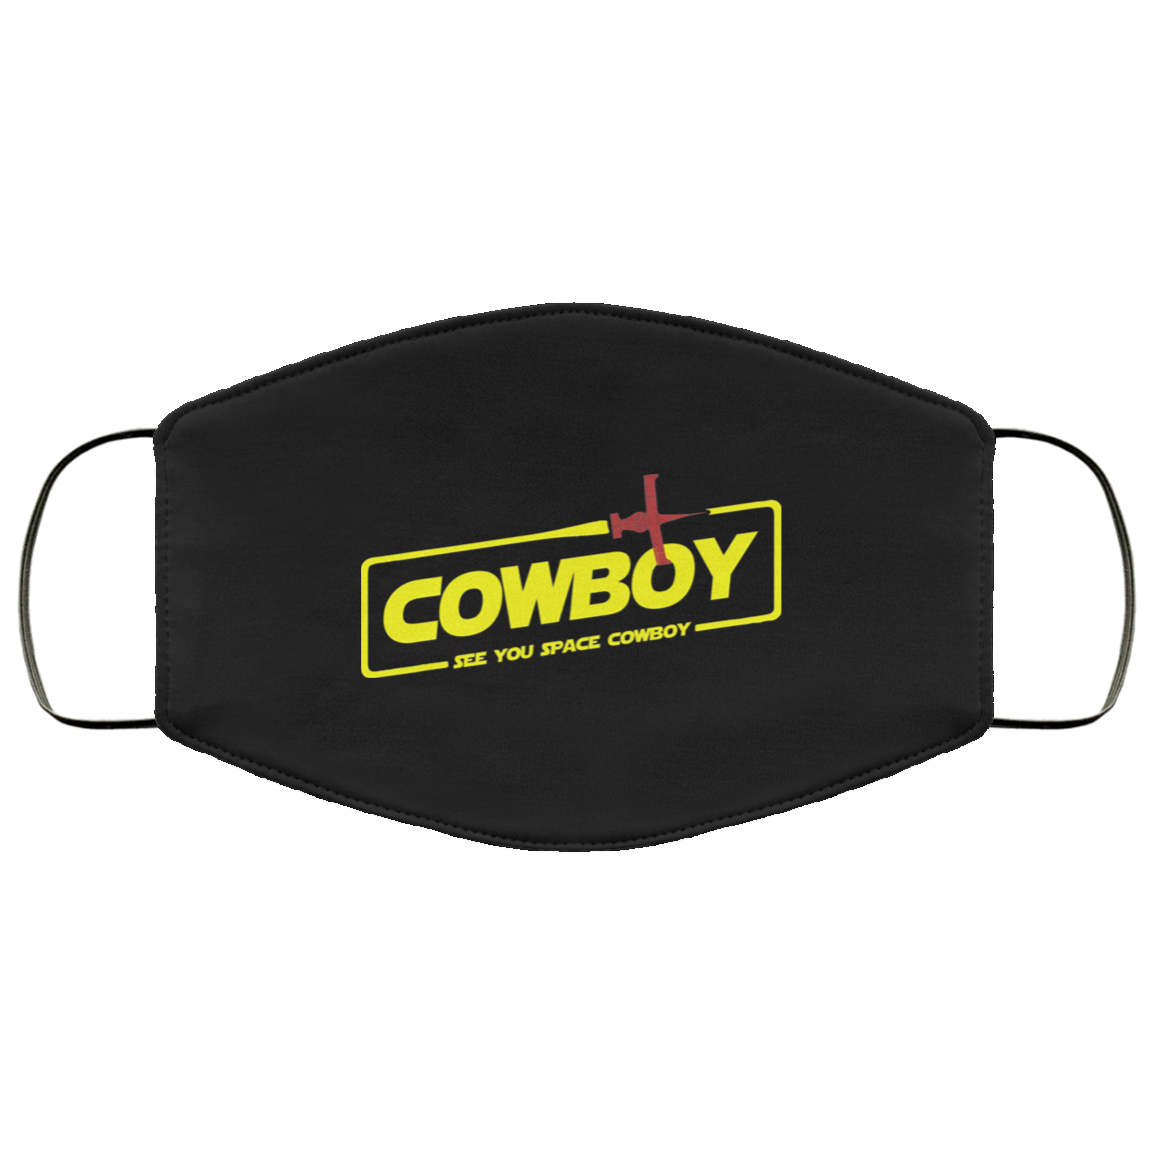 Cowboy See You Space Cowboy Face Mask